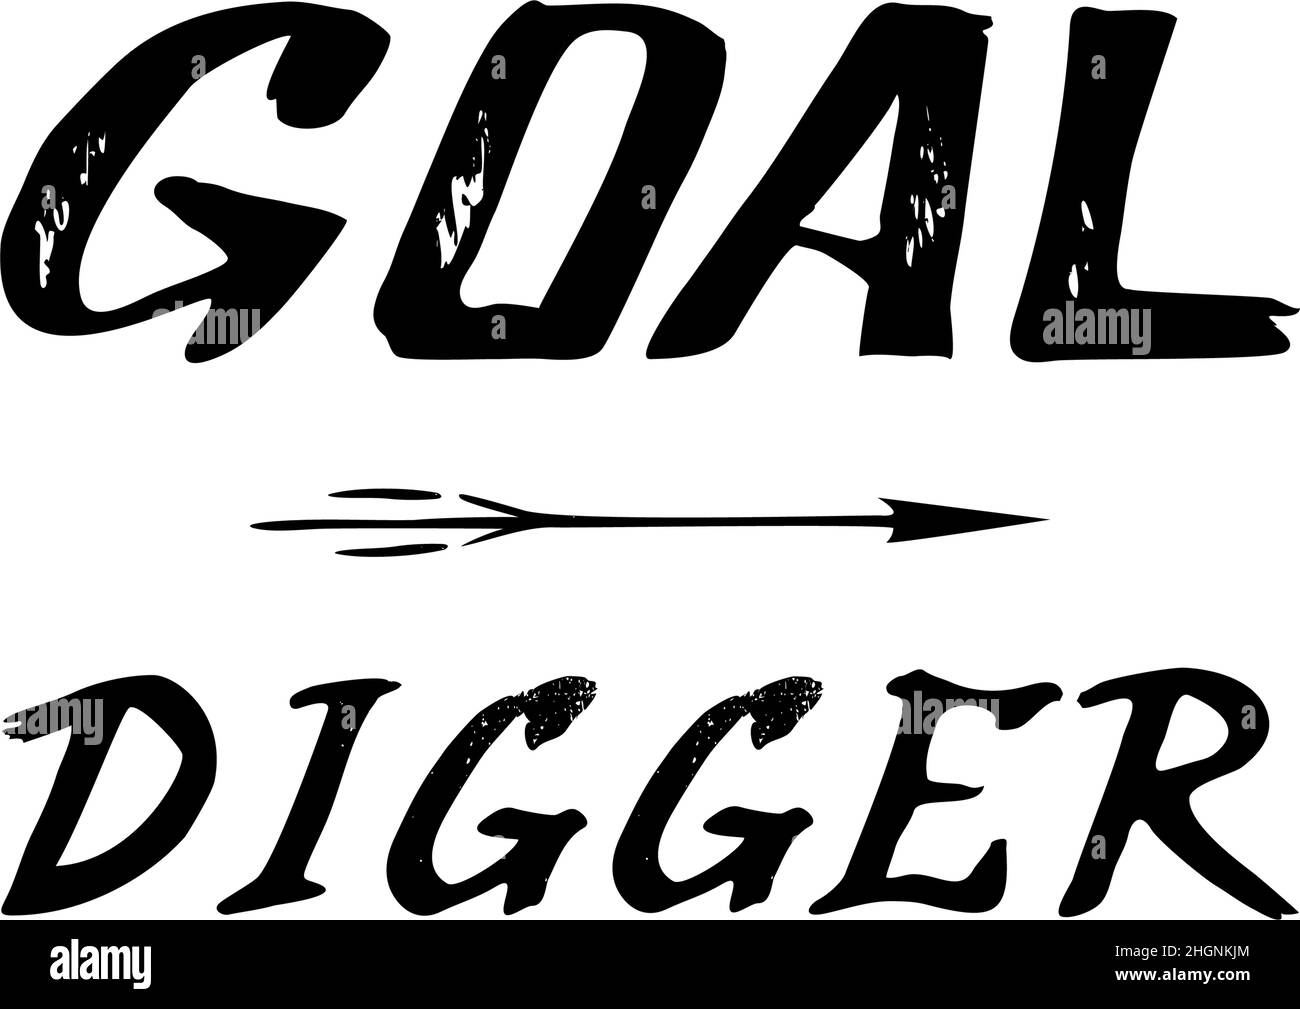 Goal Digger, brush lettering for purposeful courageous people, describing goal setting for life or self-improvement. Hand-drawn positive witty slogan Stock Vector